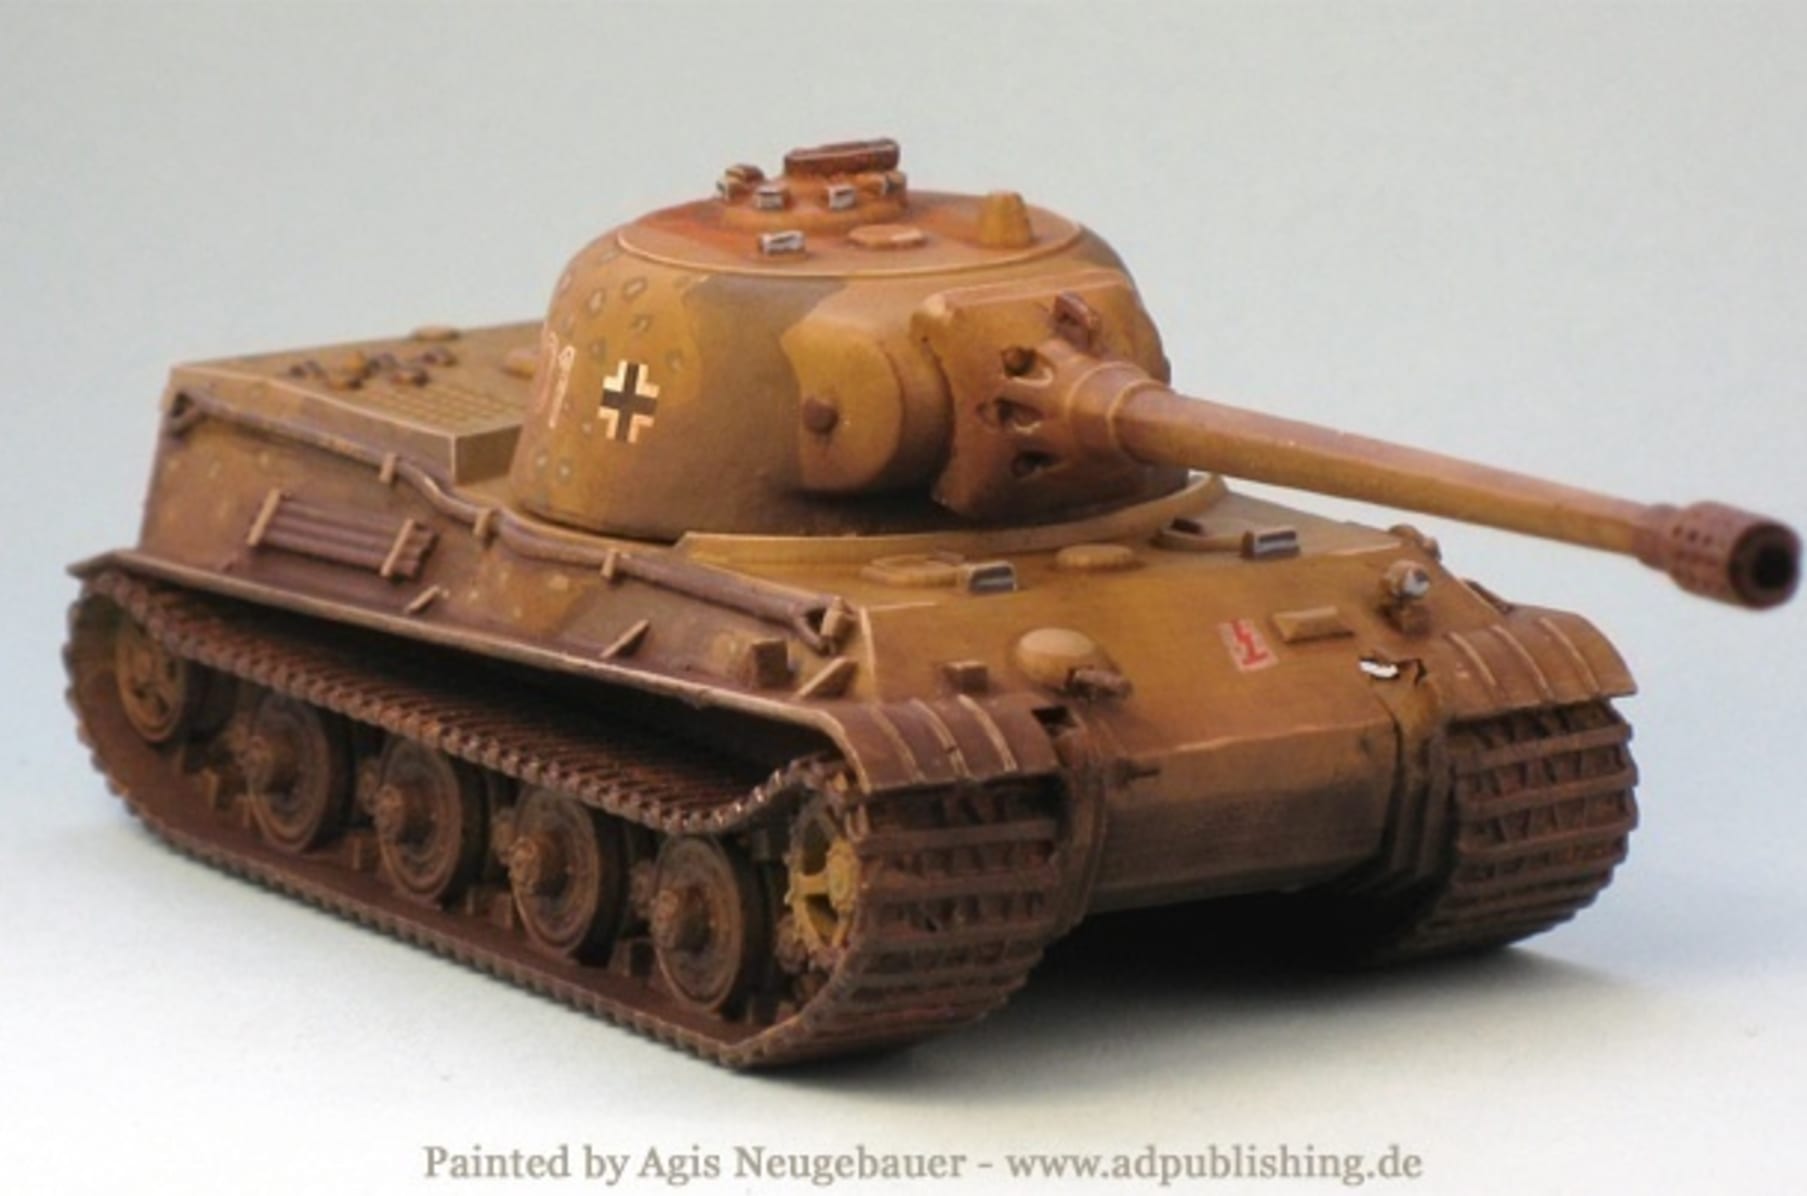 Collectible Metal Model of the German Tank Lowe Scale 1:100 World of Tanks. 